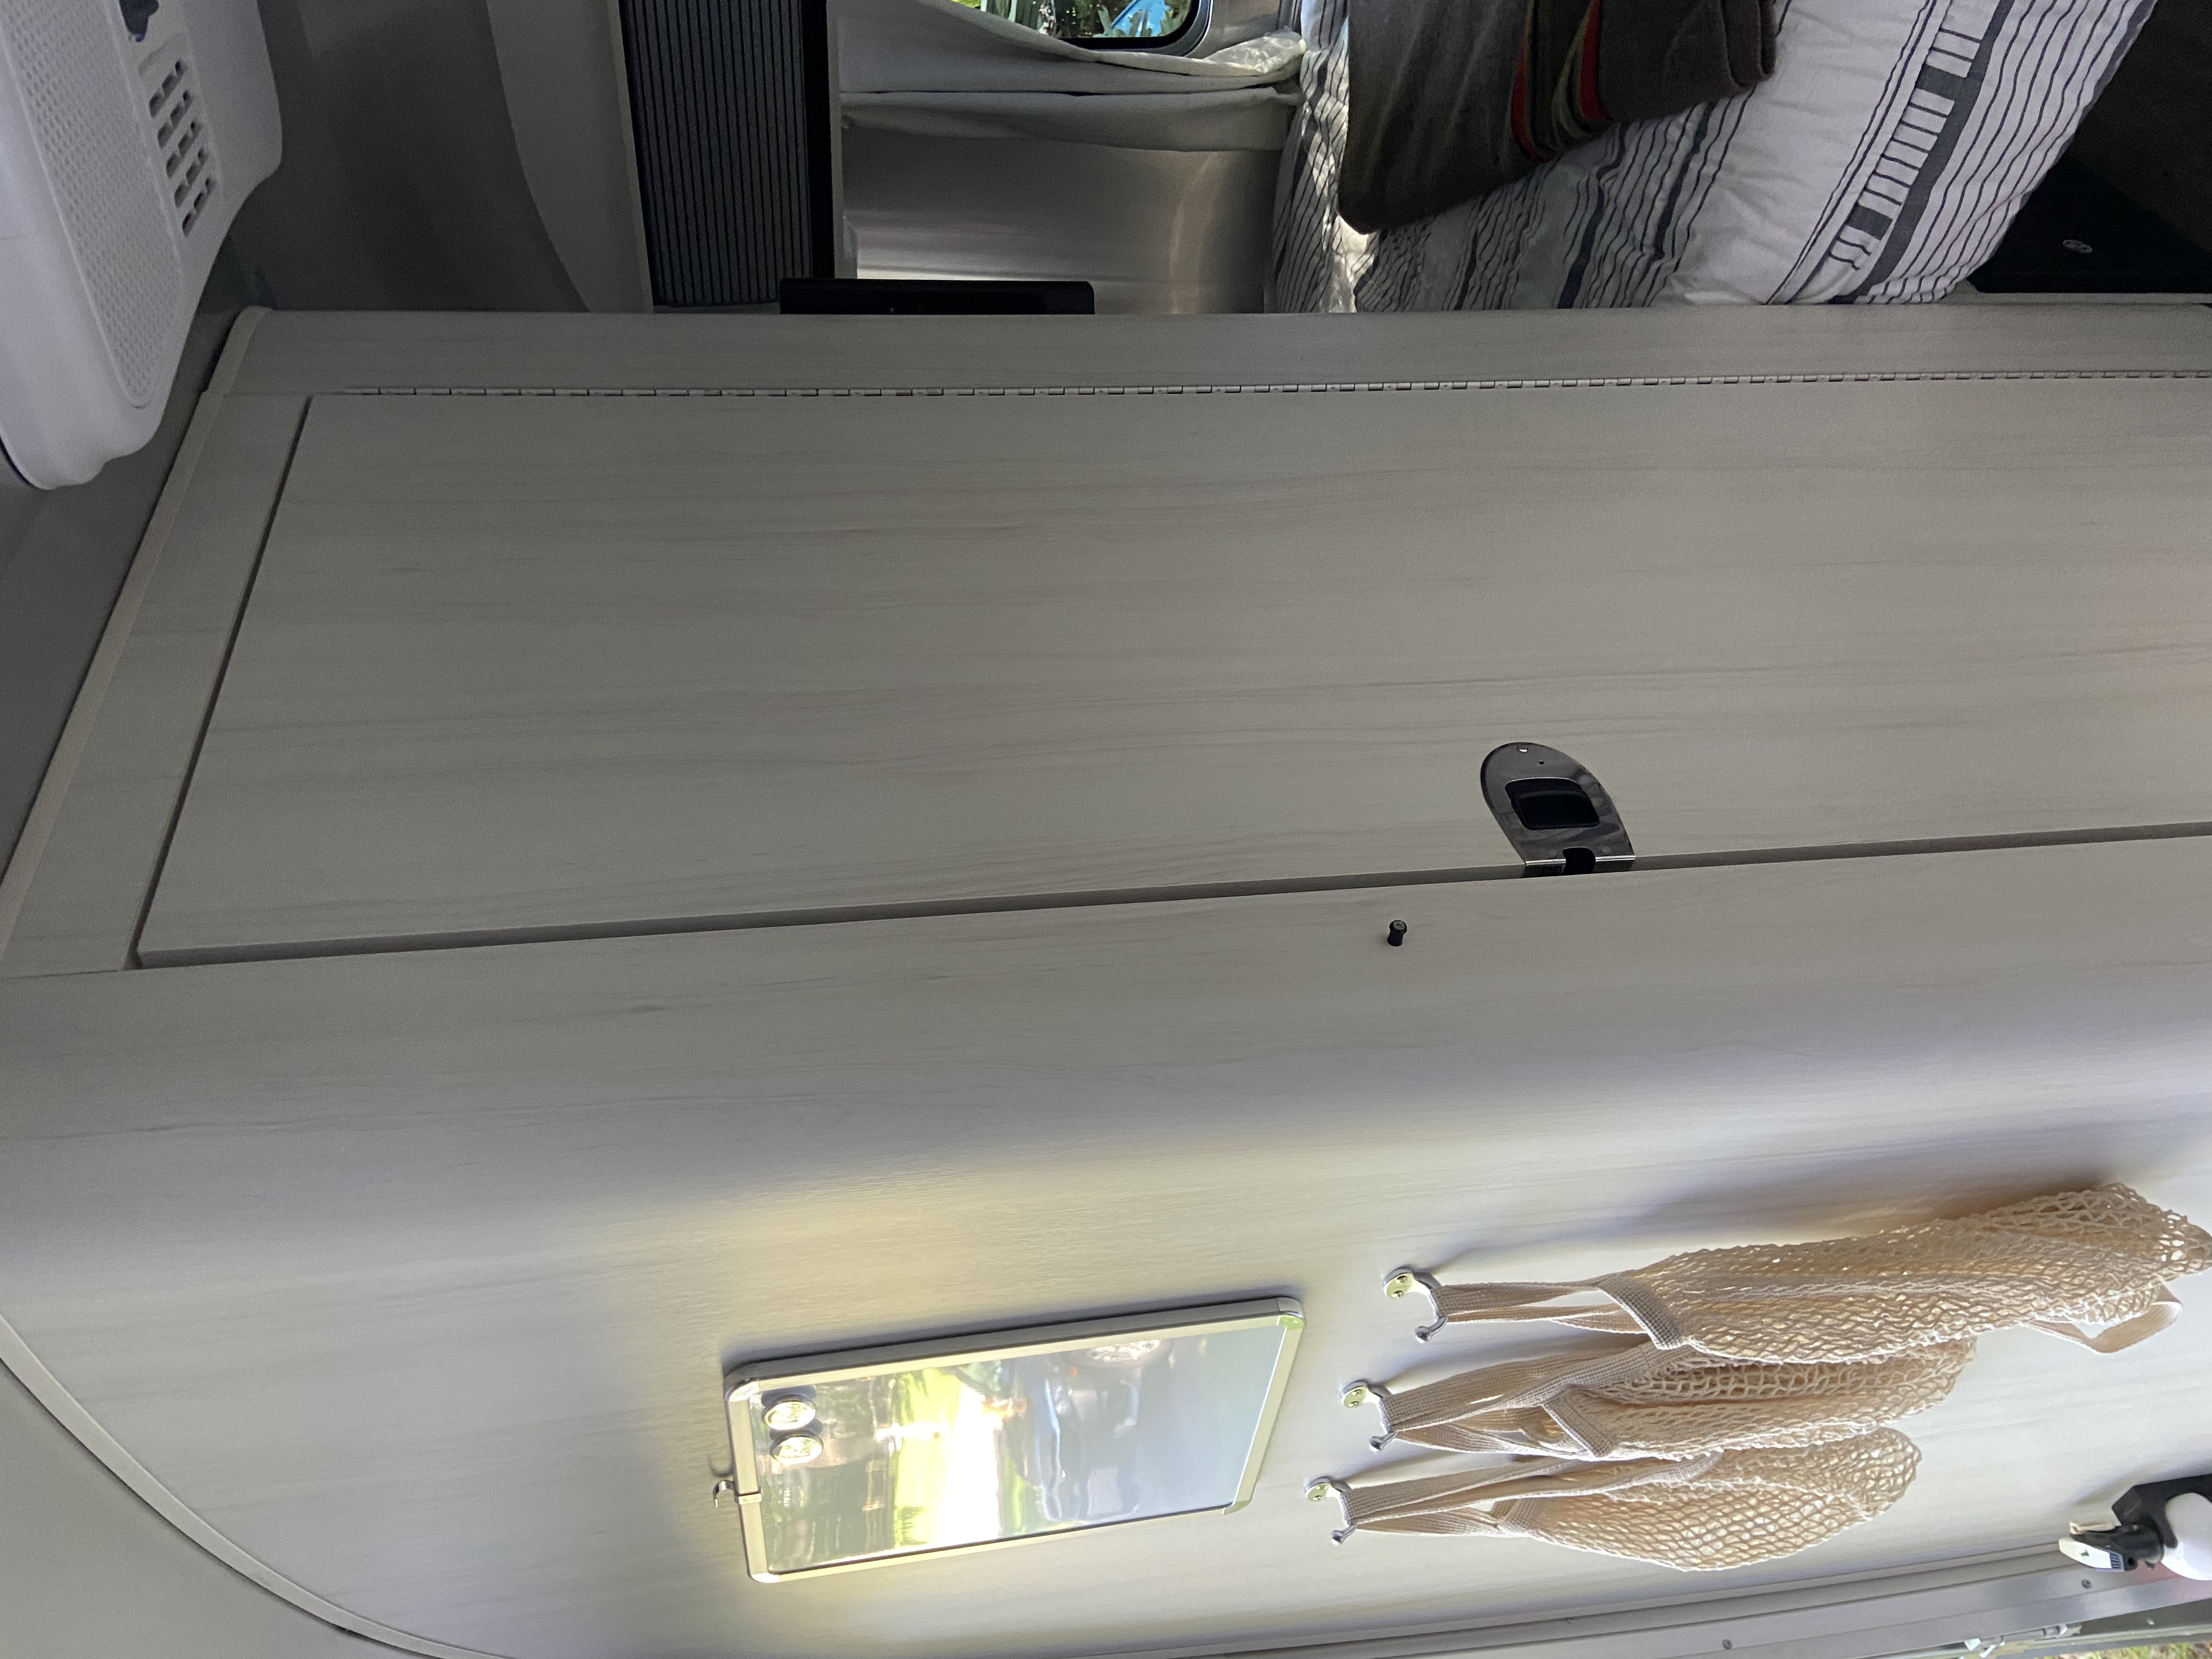 2018 Airstream 16FT Bambi For Sale in Sandwich - Airstream Marketplace